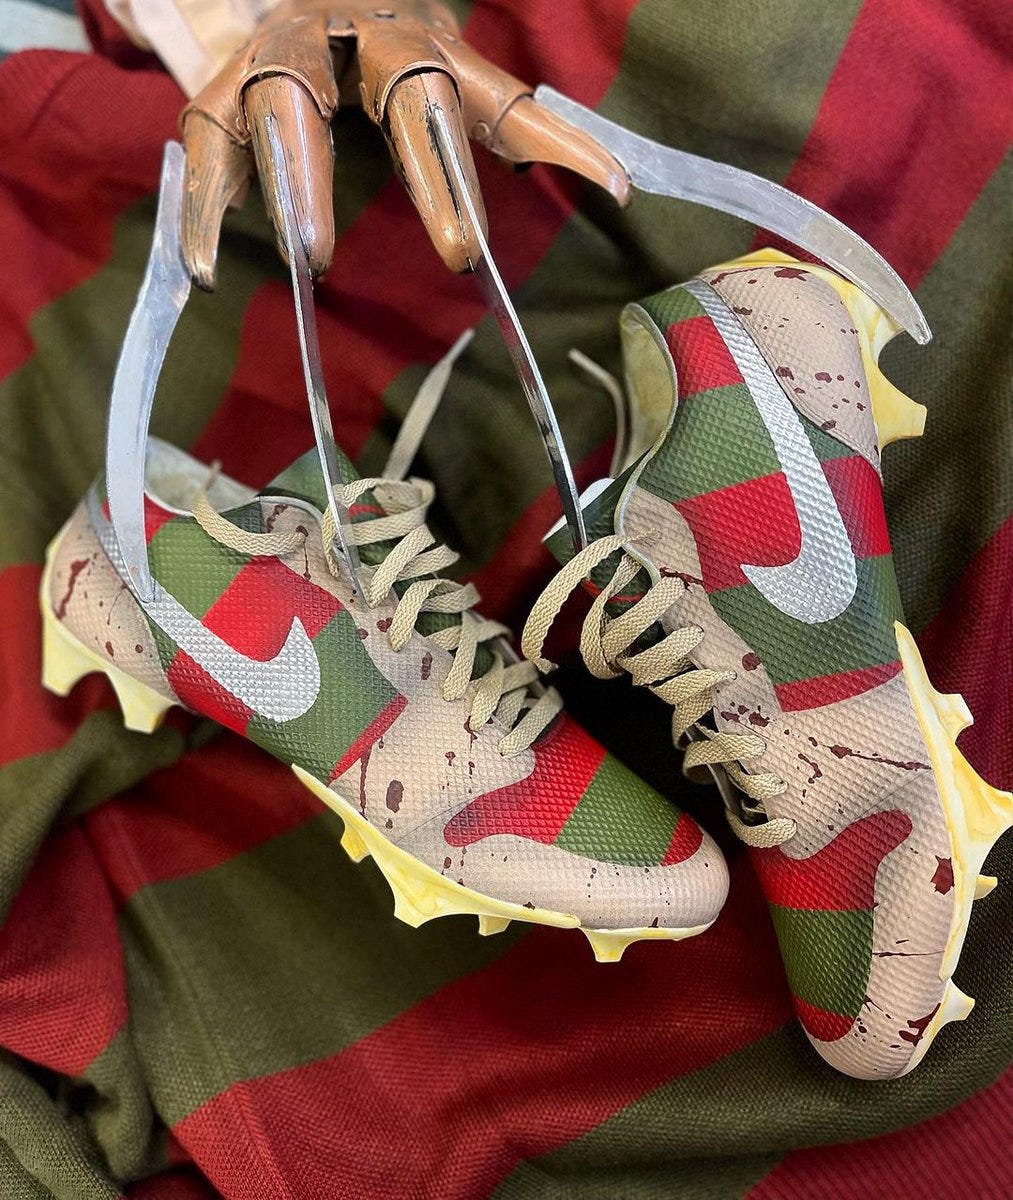 Complex Sneakers on X: "“Freddy Krueger” Nike SB Dunk-inspired cleats for @ stefondiggs during warmups. 🎨 @MACHE275 https://t.co/xY4cr3fkIq" / X